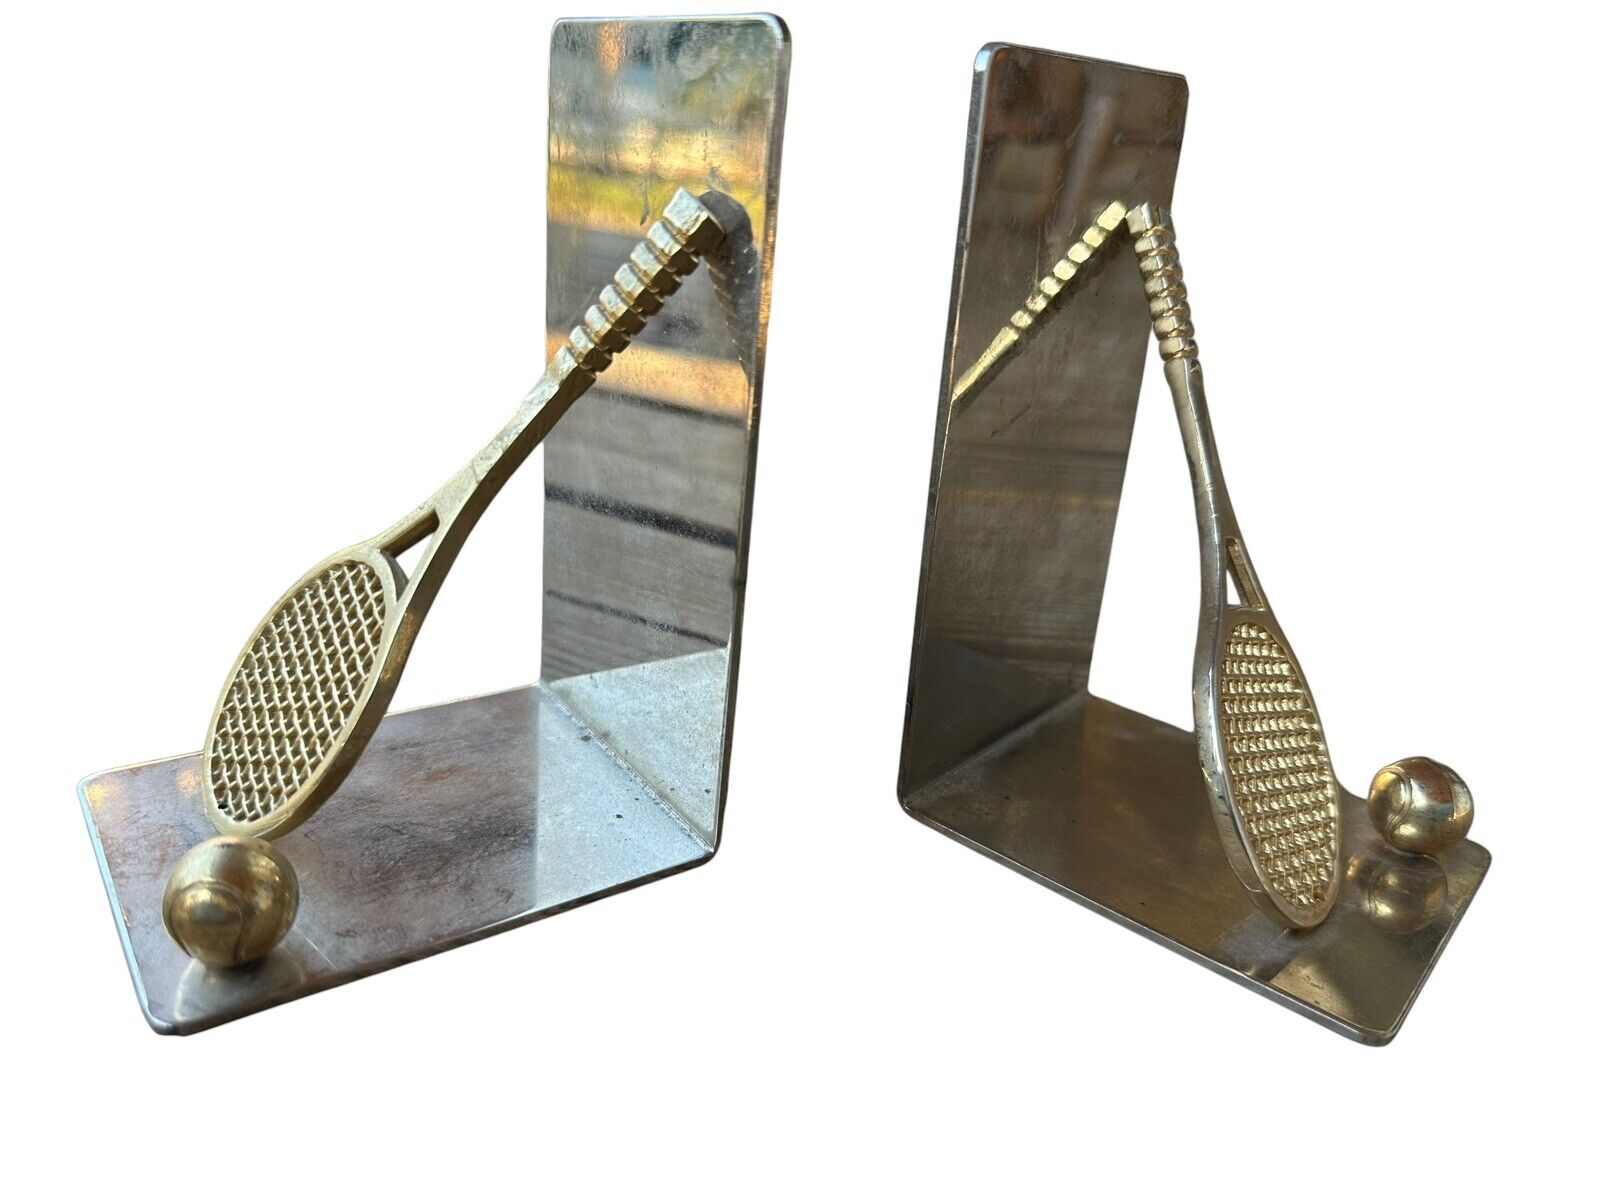 Vintage Tennis Racket and Tennis Ball Bookends, Sports Room Decor, Nostalgic